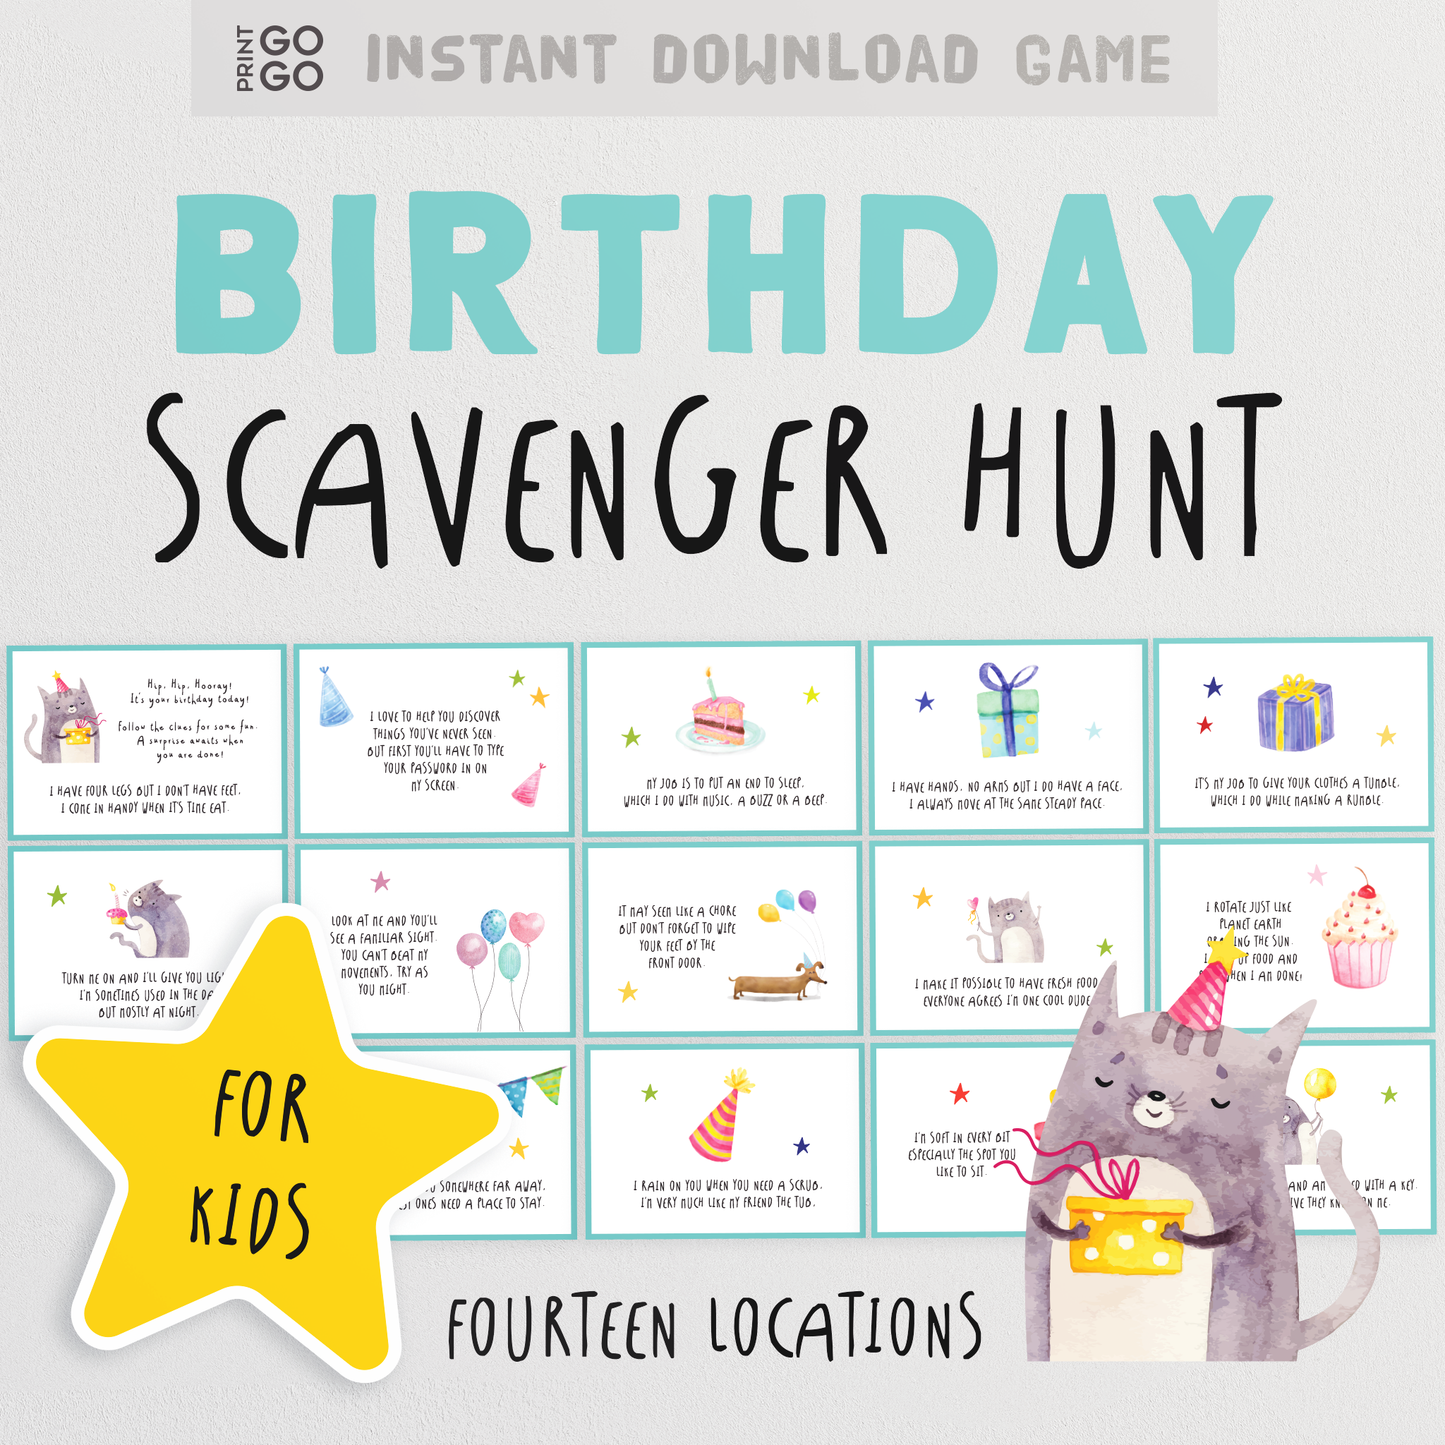 Birthday Scavenger Hunt - A Fun Race of Solving Clues and Finding Rewards for Kids